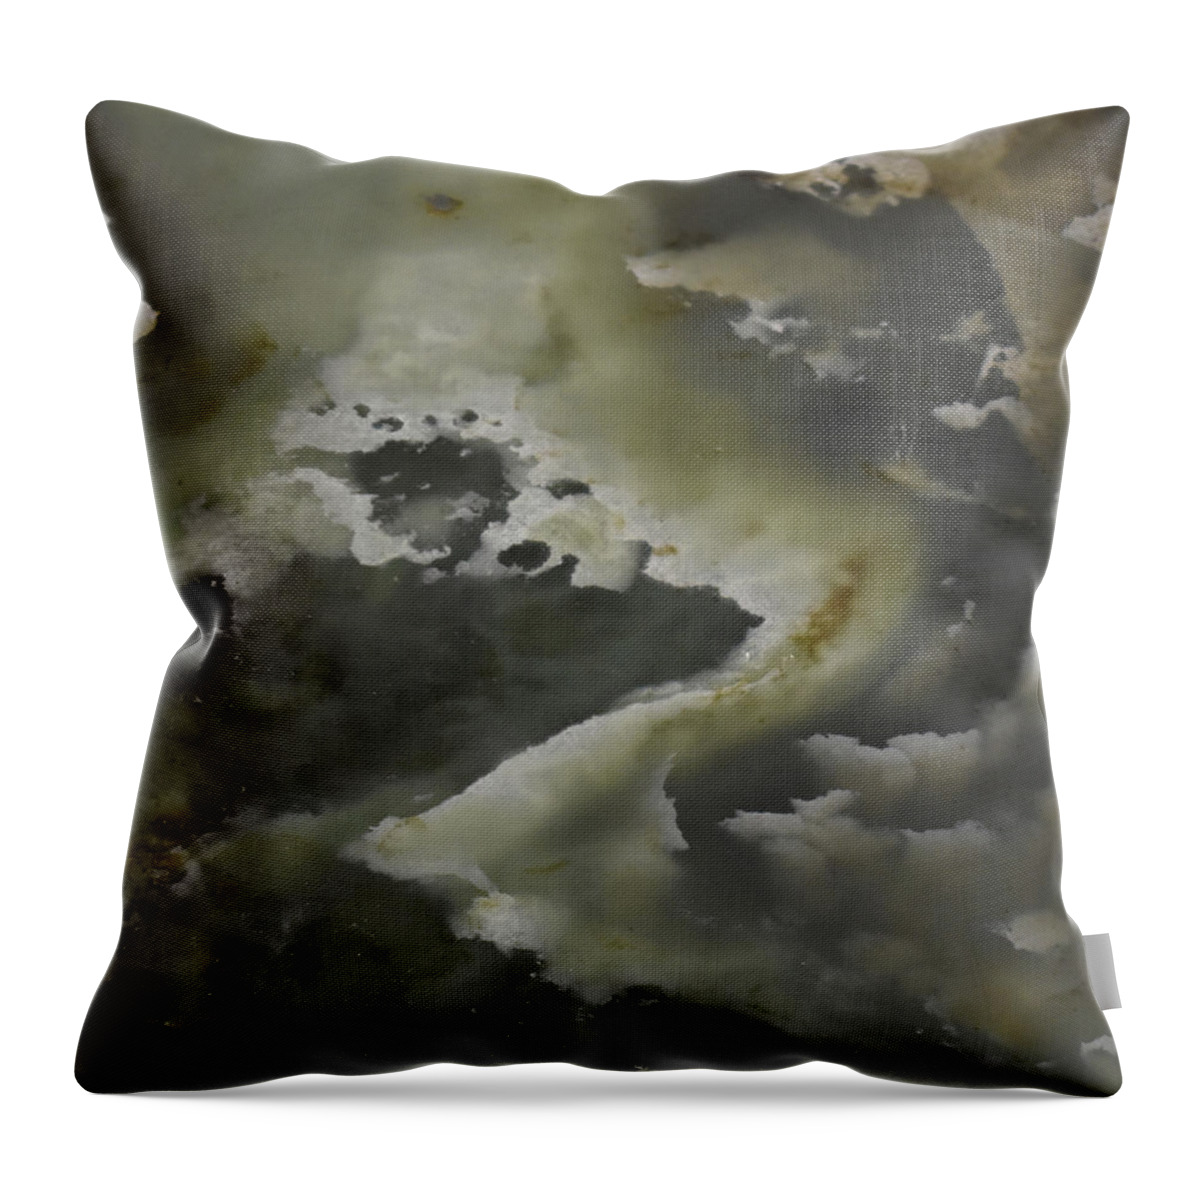 Art In A Rock Throw Pillow featuring the photograph Mr1029d by Art in a Rock